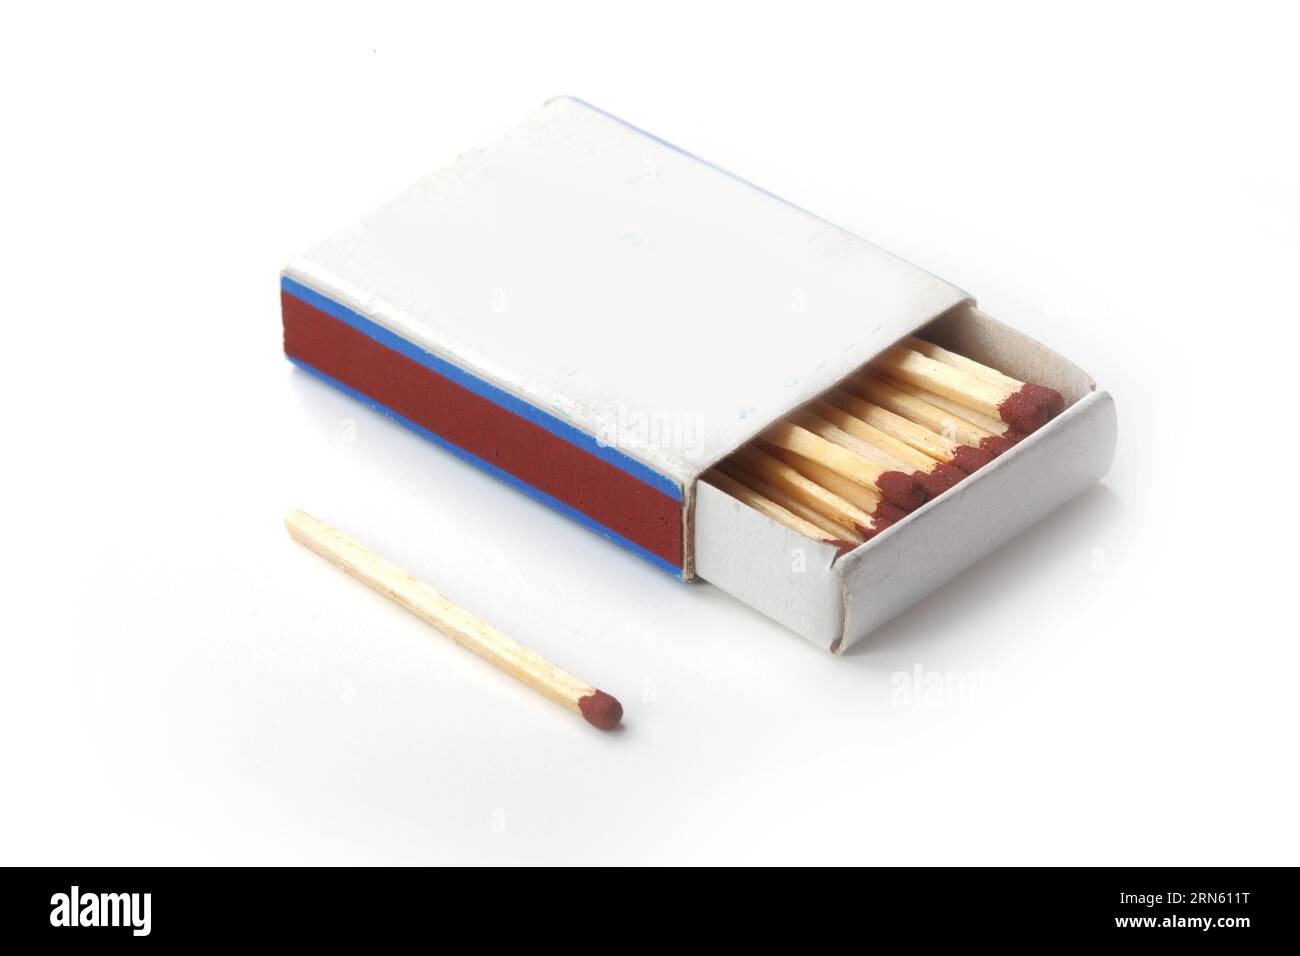 Vintage cardboard matchbox with matches isolated on white